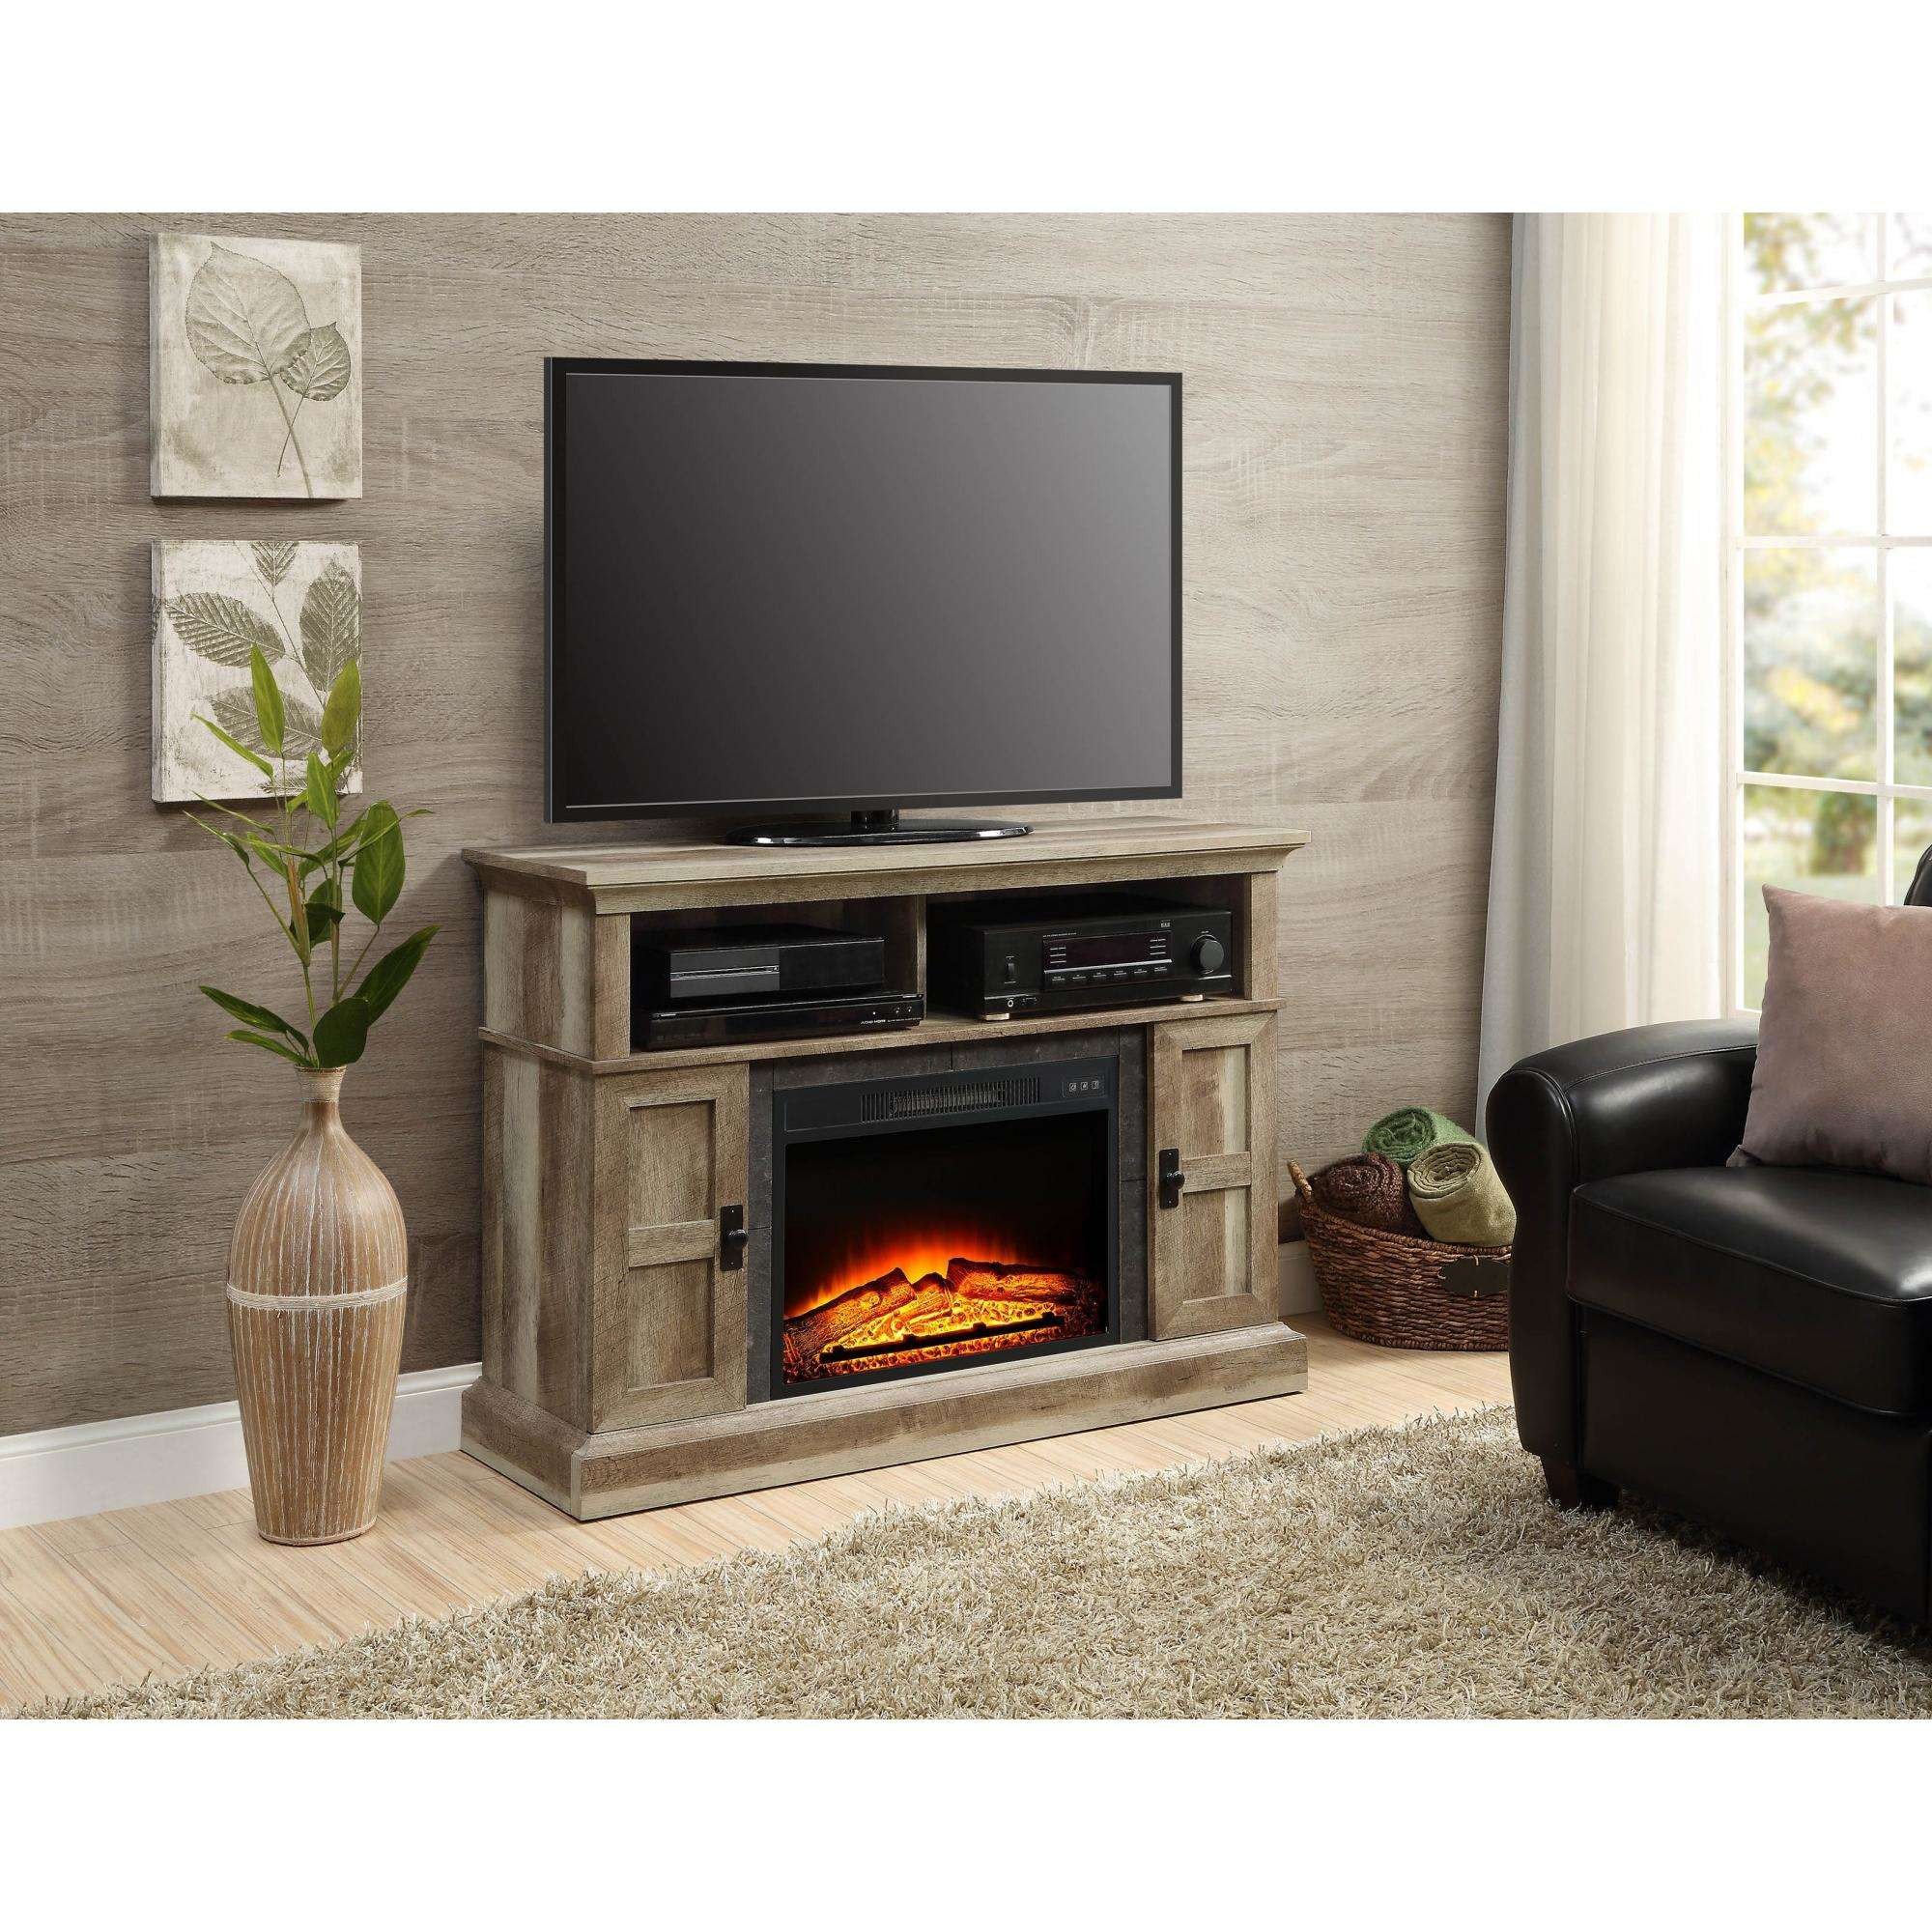 Rustic Electric Fireplace
 Weathered Rustic Electric Fireplace 55" TV Stand